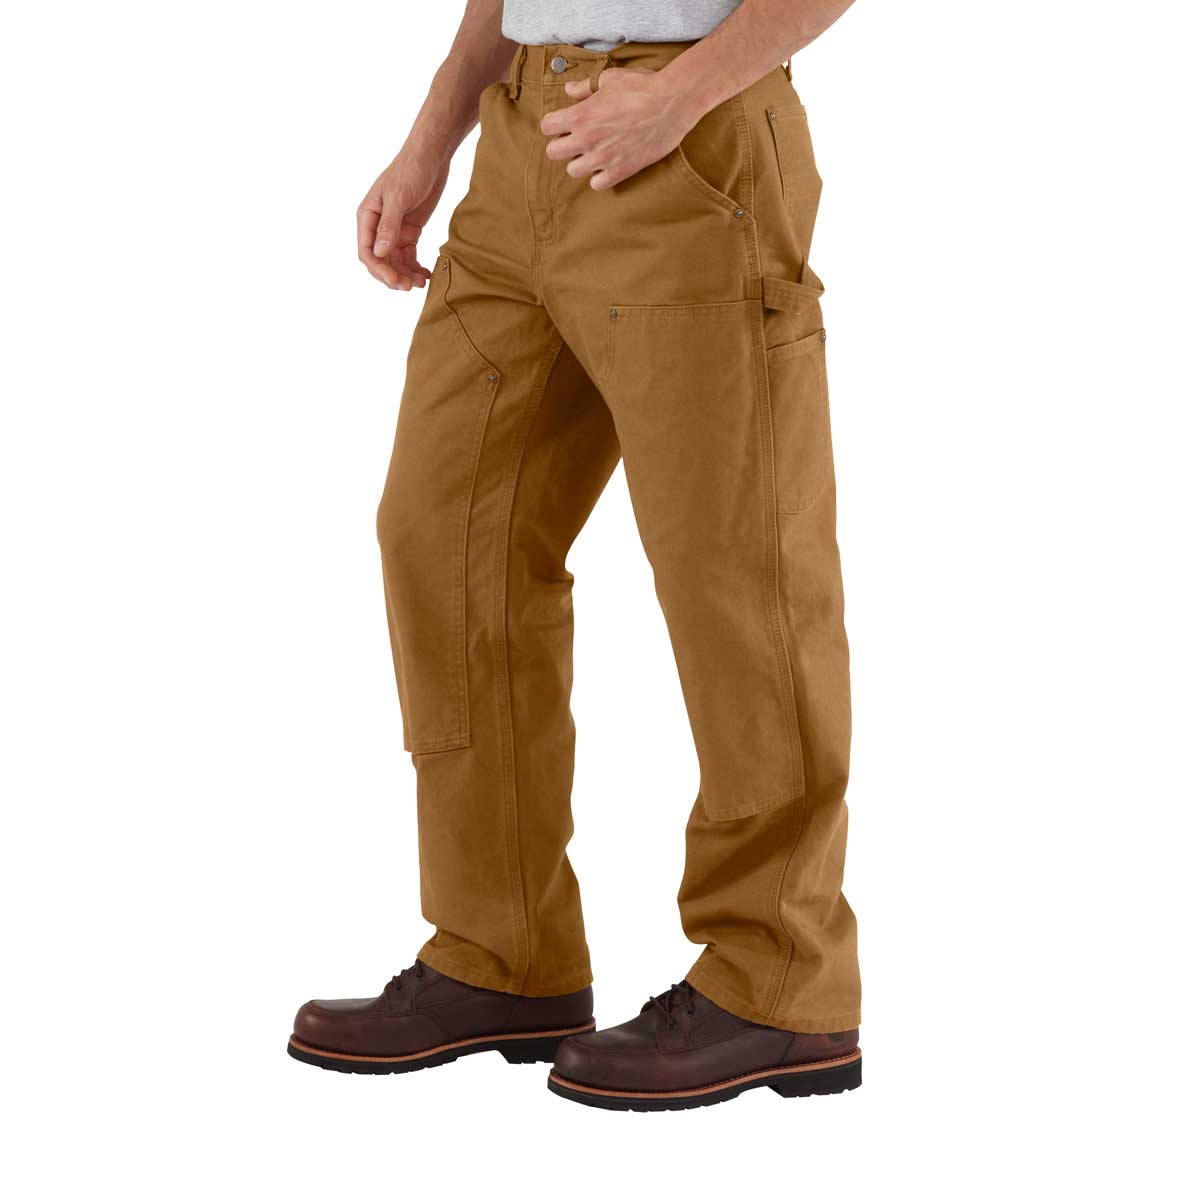 Carhartt Loose Fit Washed Duck Flannel-Lined Utility Work Pants - B111